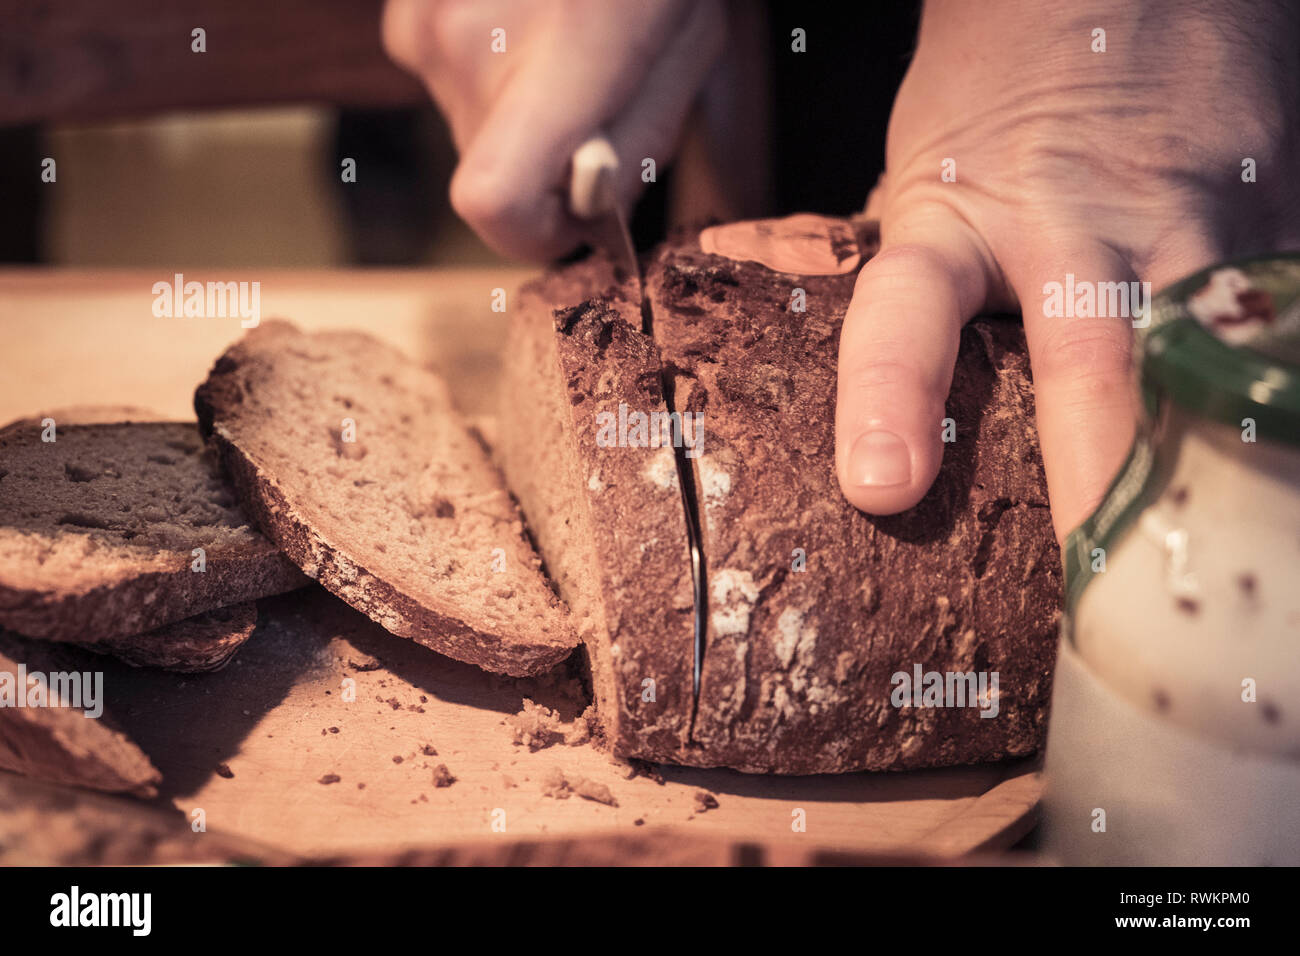 Man slicing rustic brown loaf, close up of hand Stock Photo